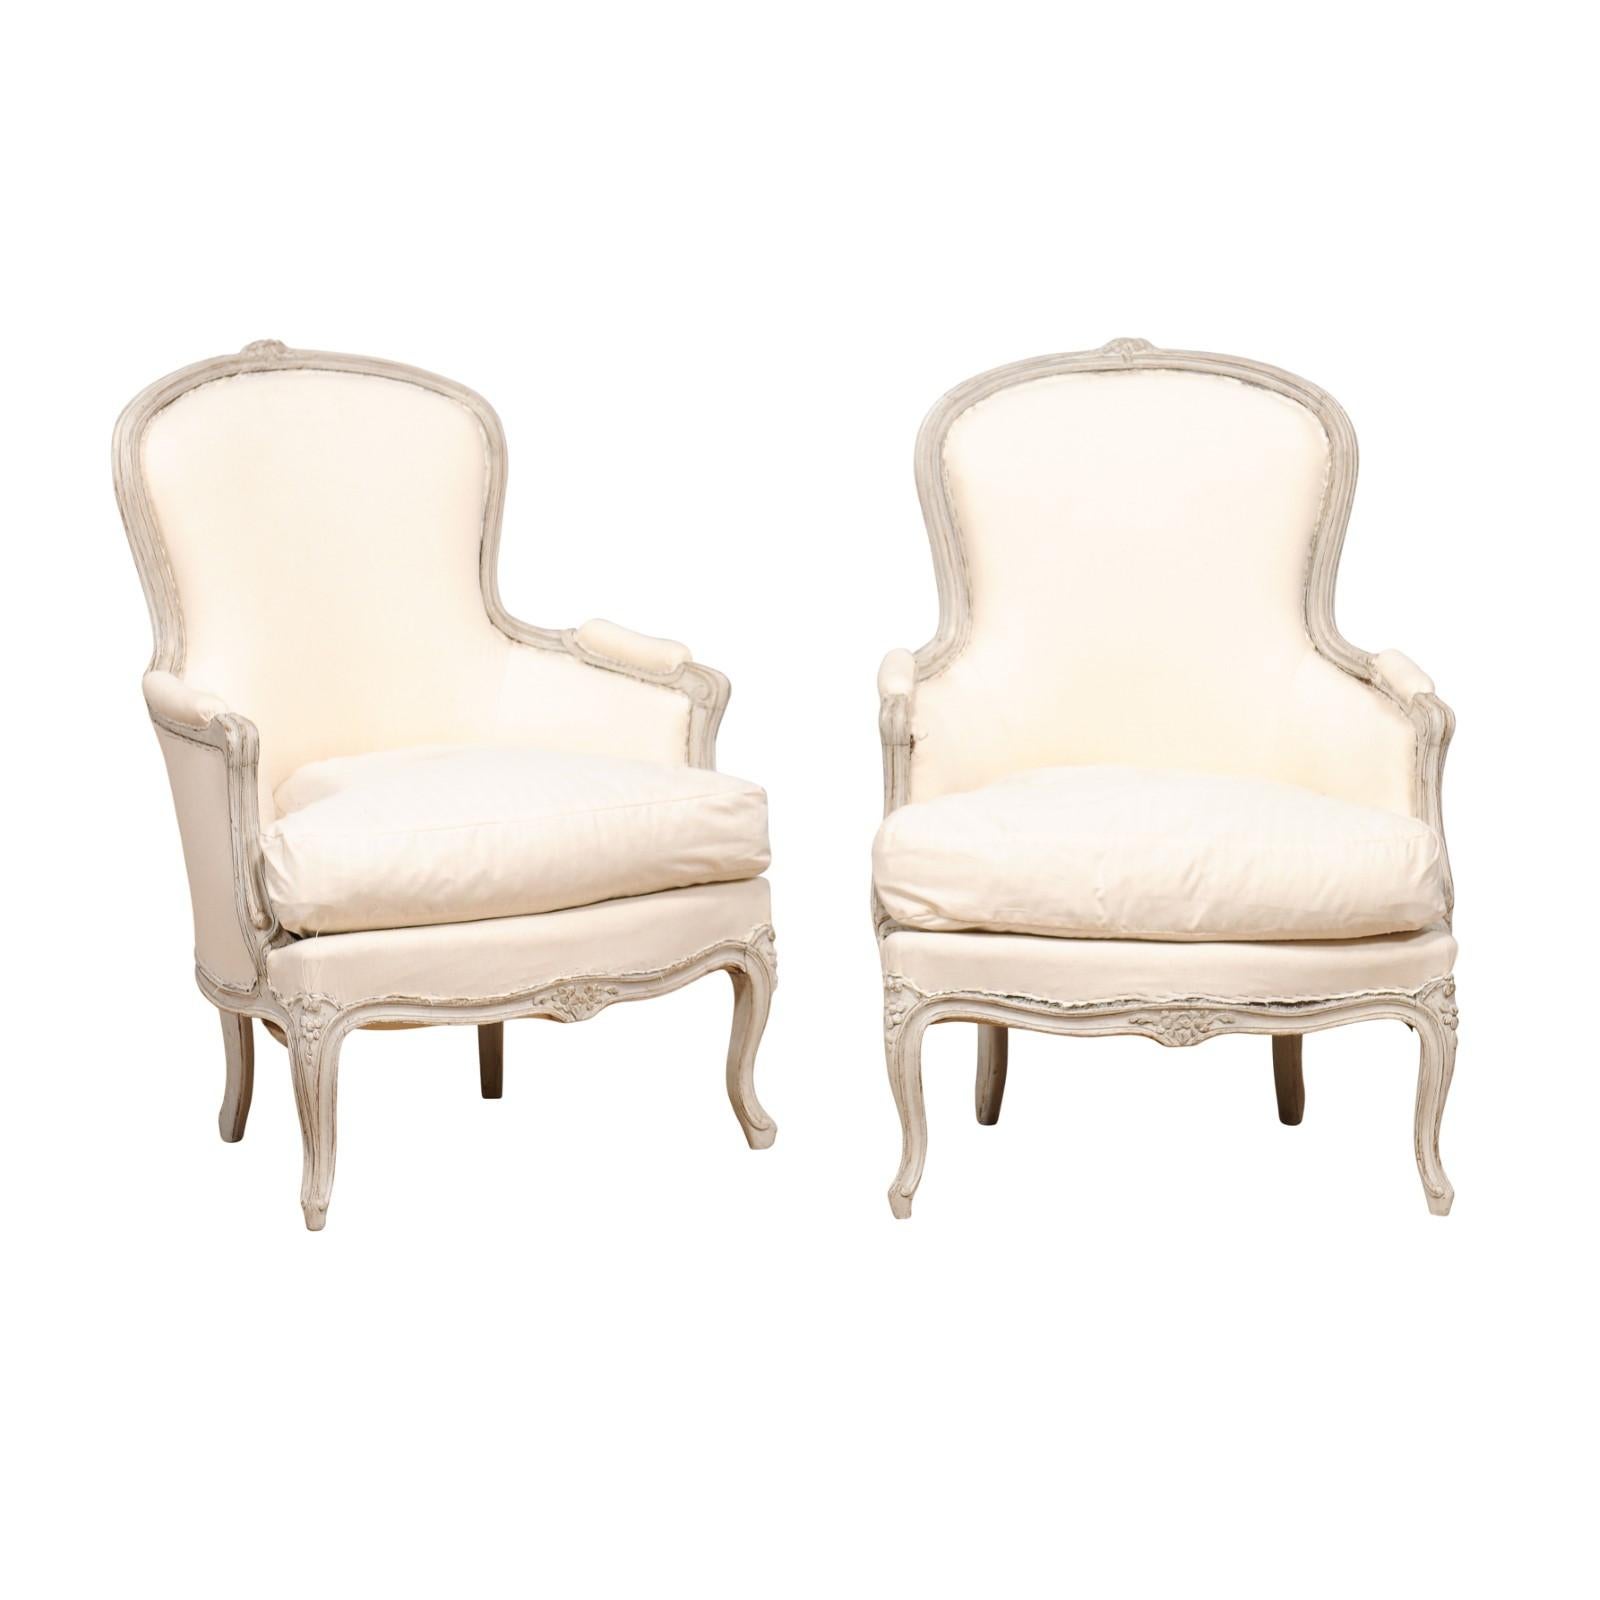 A pair of Swedish Rococo style classic light grey painted bergères chairs from circa 1890 with carved floral décor, cabriole legs and upholstery. Immerse yourself in the poetic allure of this pair of Swedish Rococo Style bergères, circa 1890,